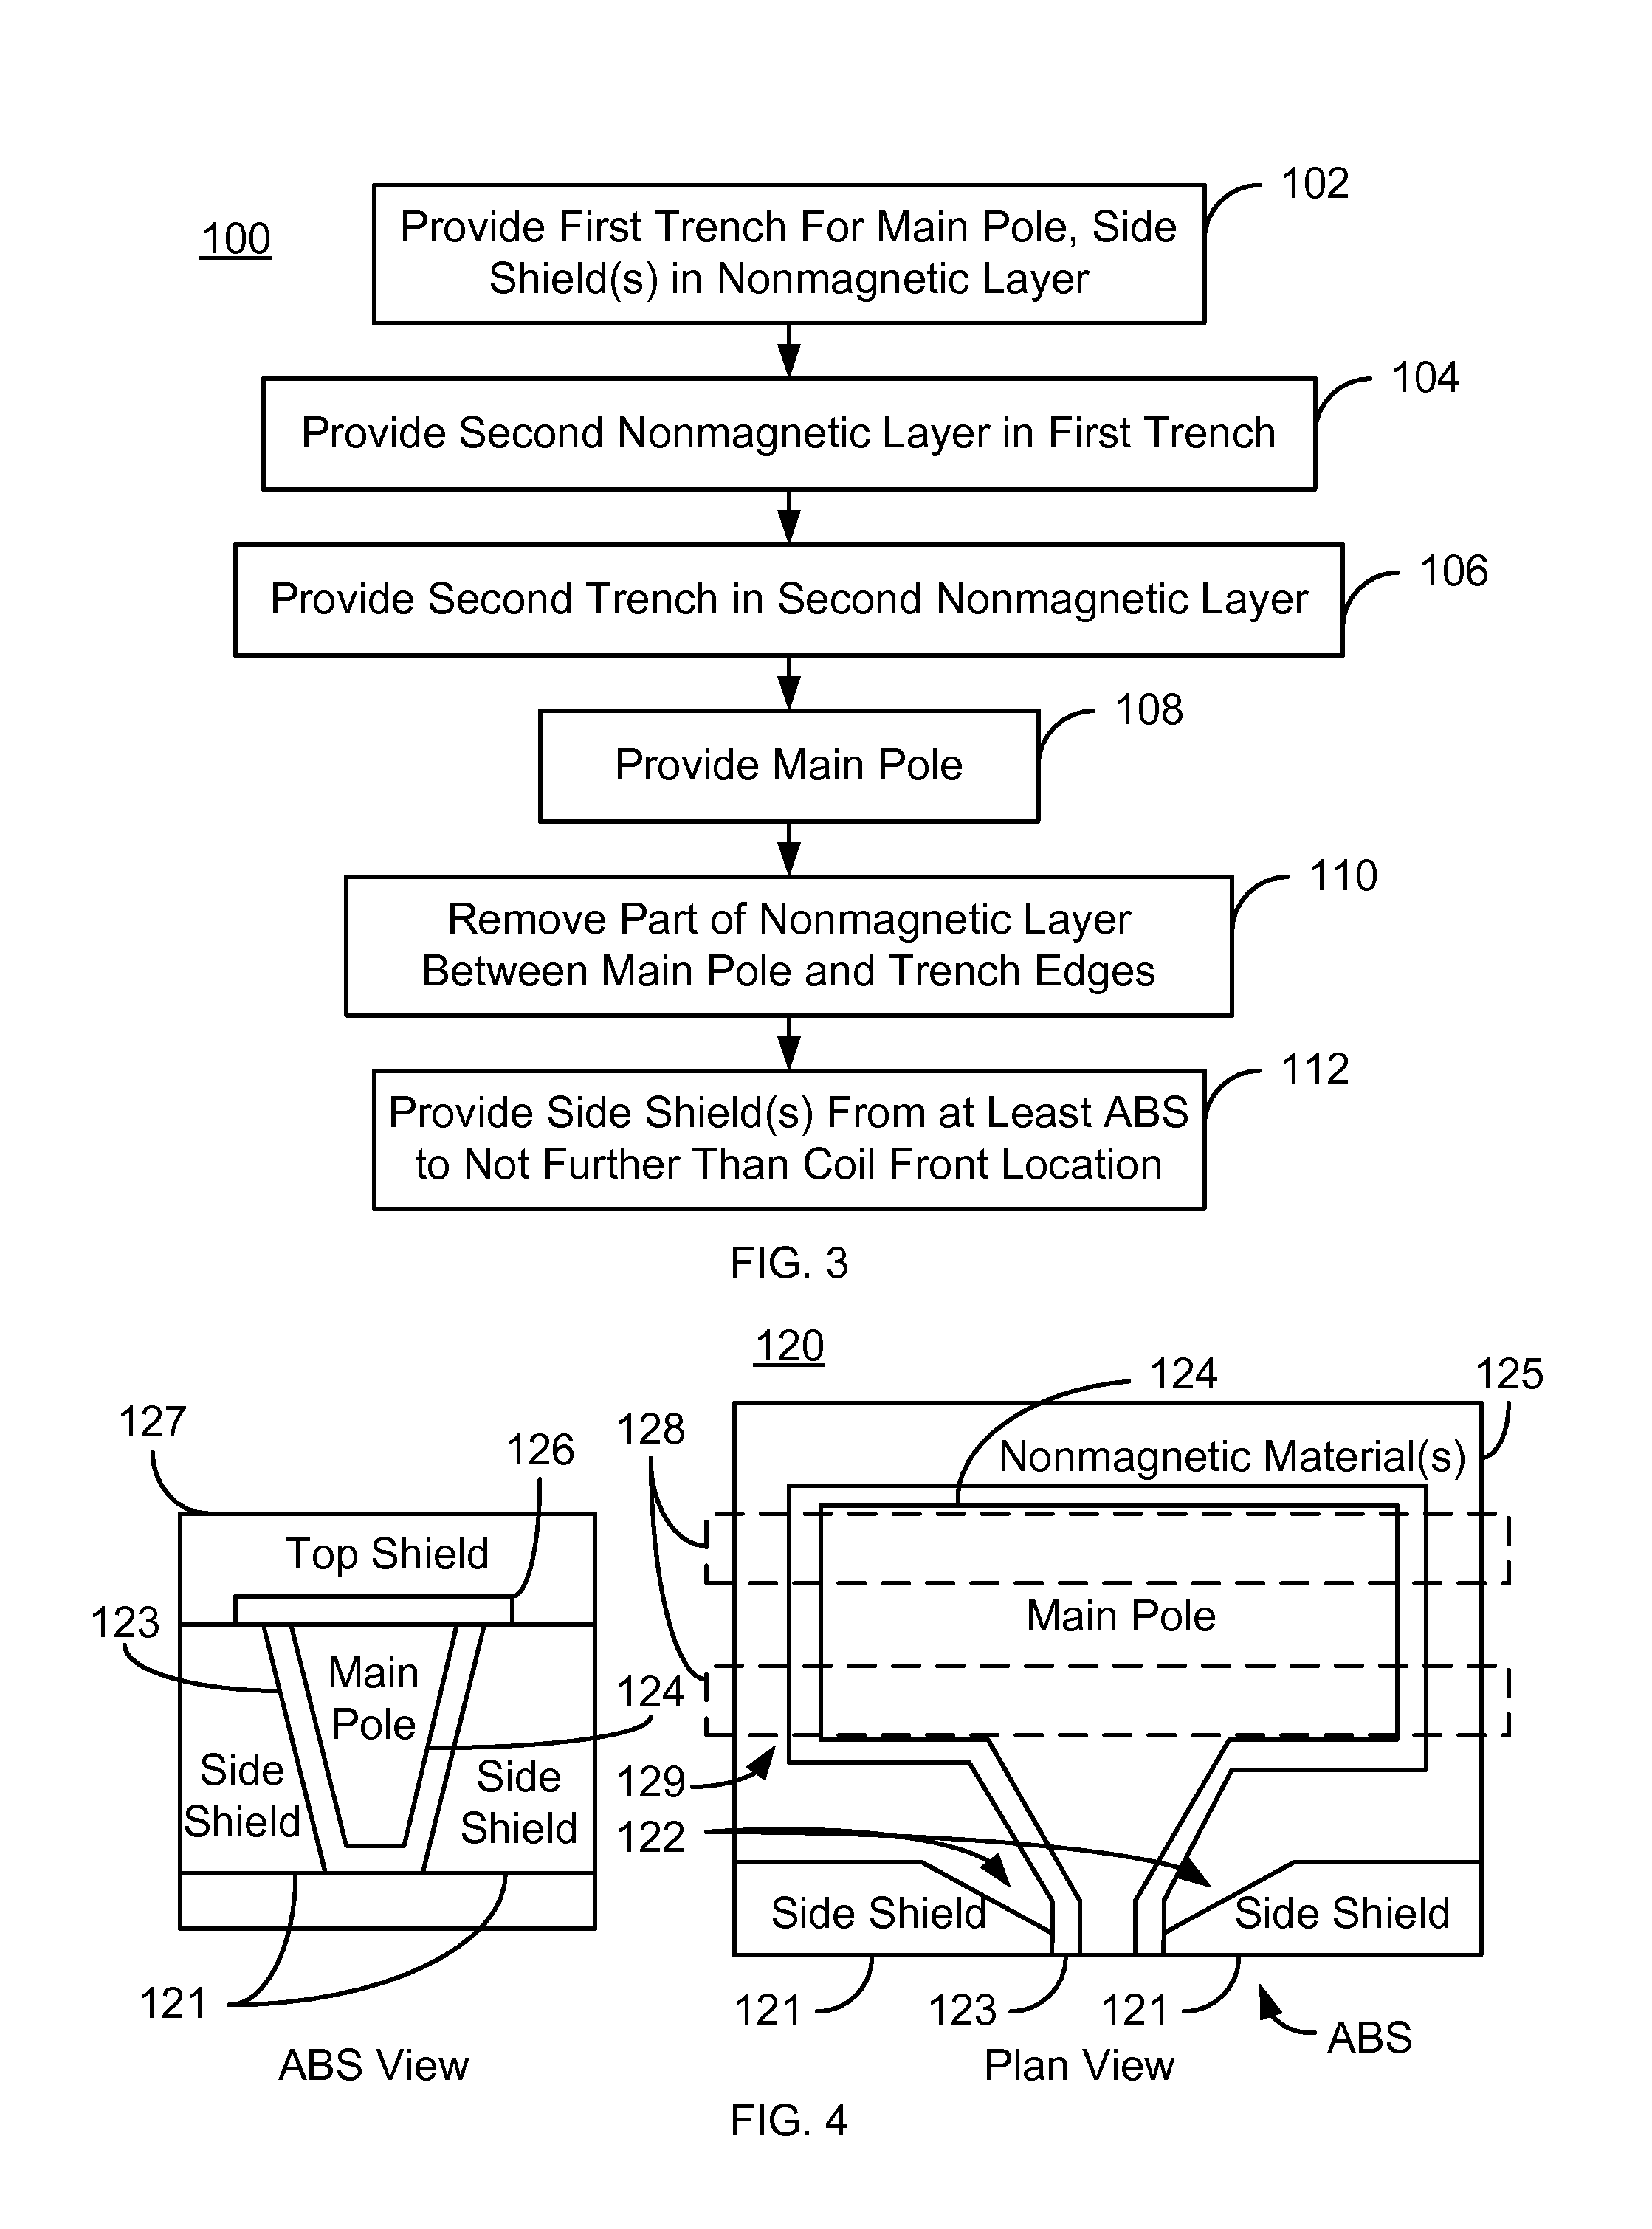 Method for fabricating a magnetic recording transducer